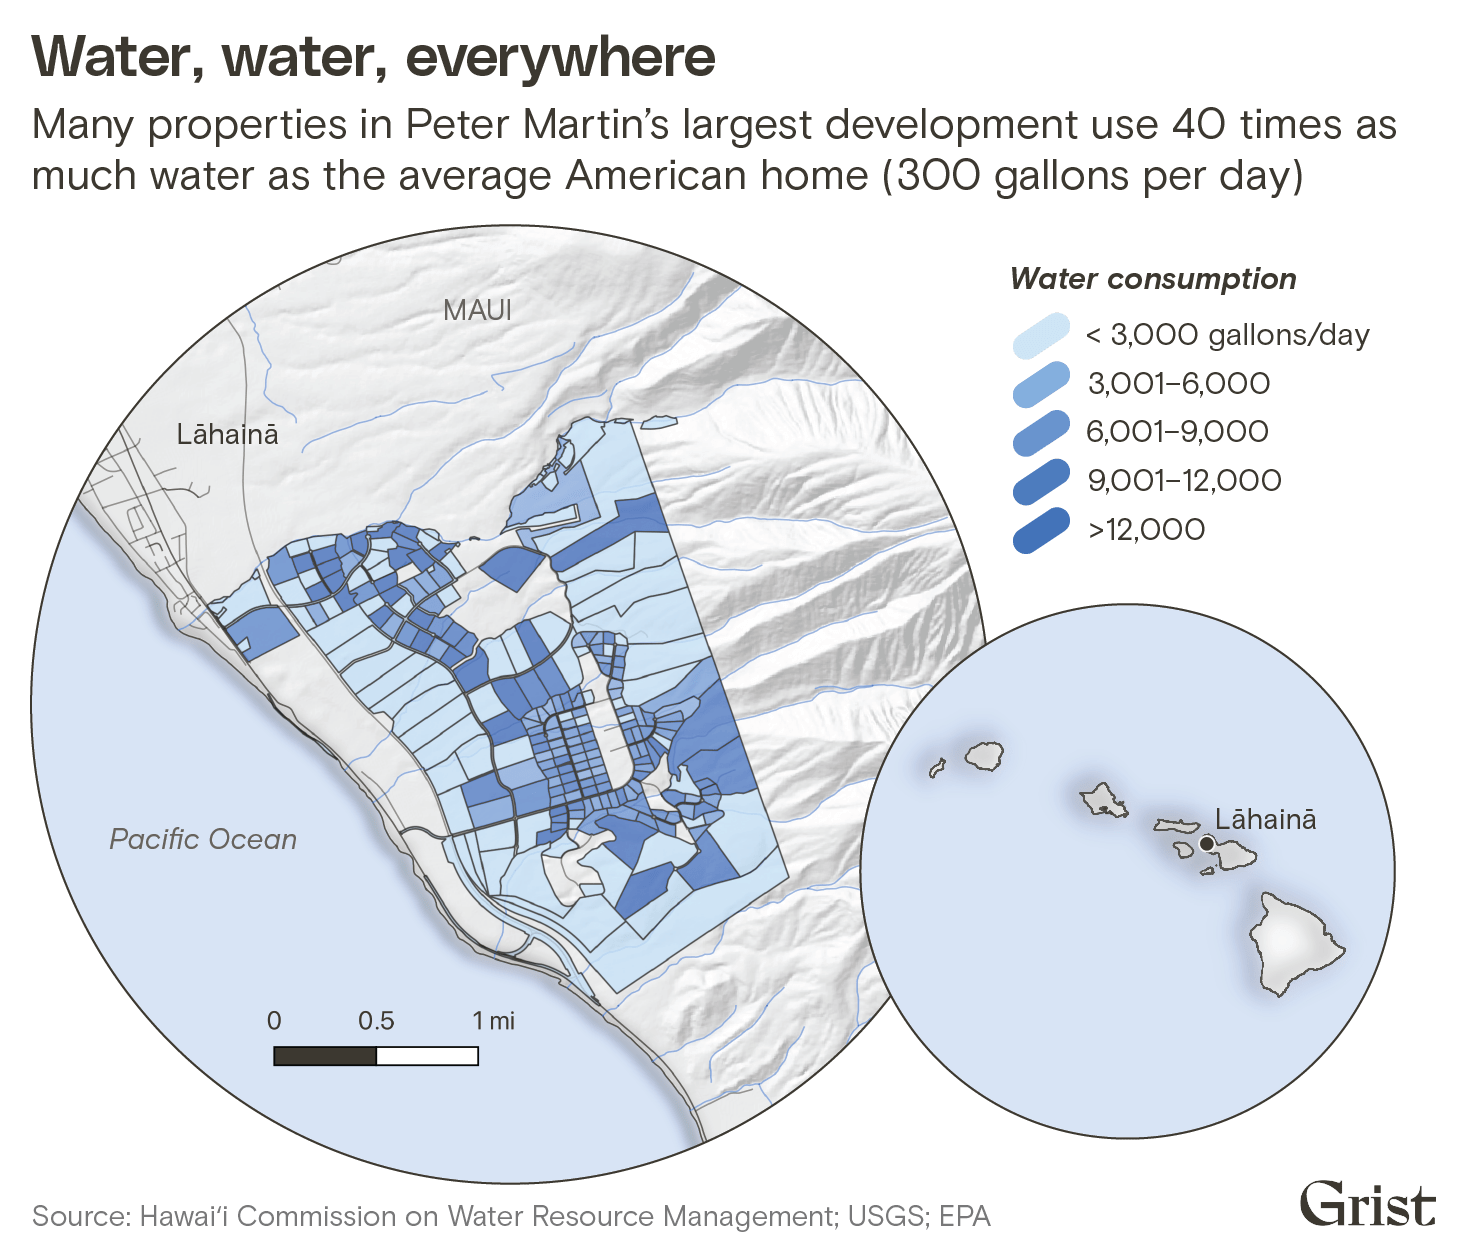 A choropleth map showing Peter Martin's largest development around Lāhainā in Maui. Many properties in the development use 40 times as much water as the average American home (300 gallons per day).